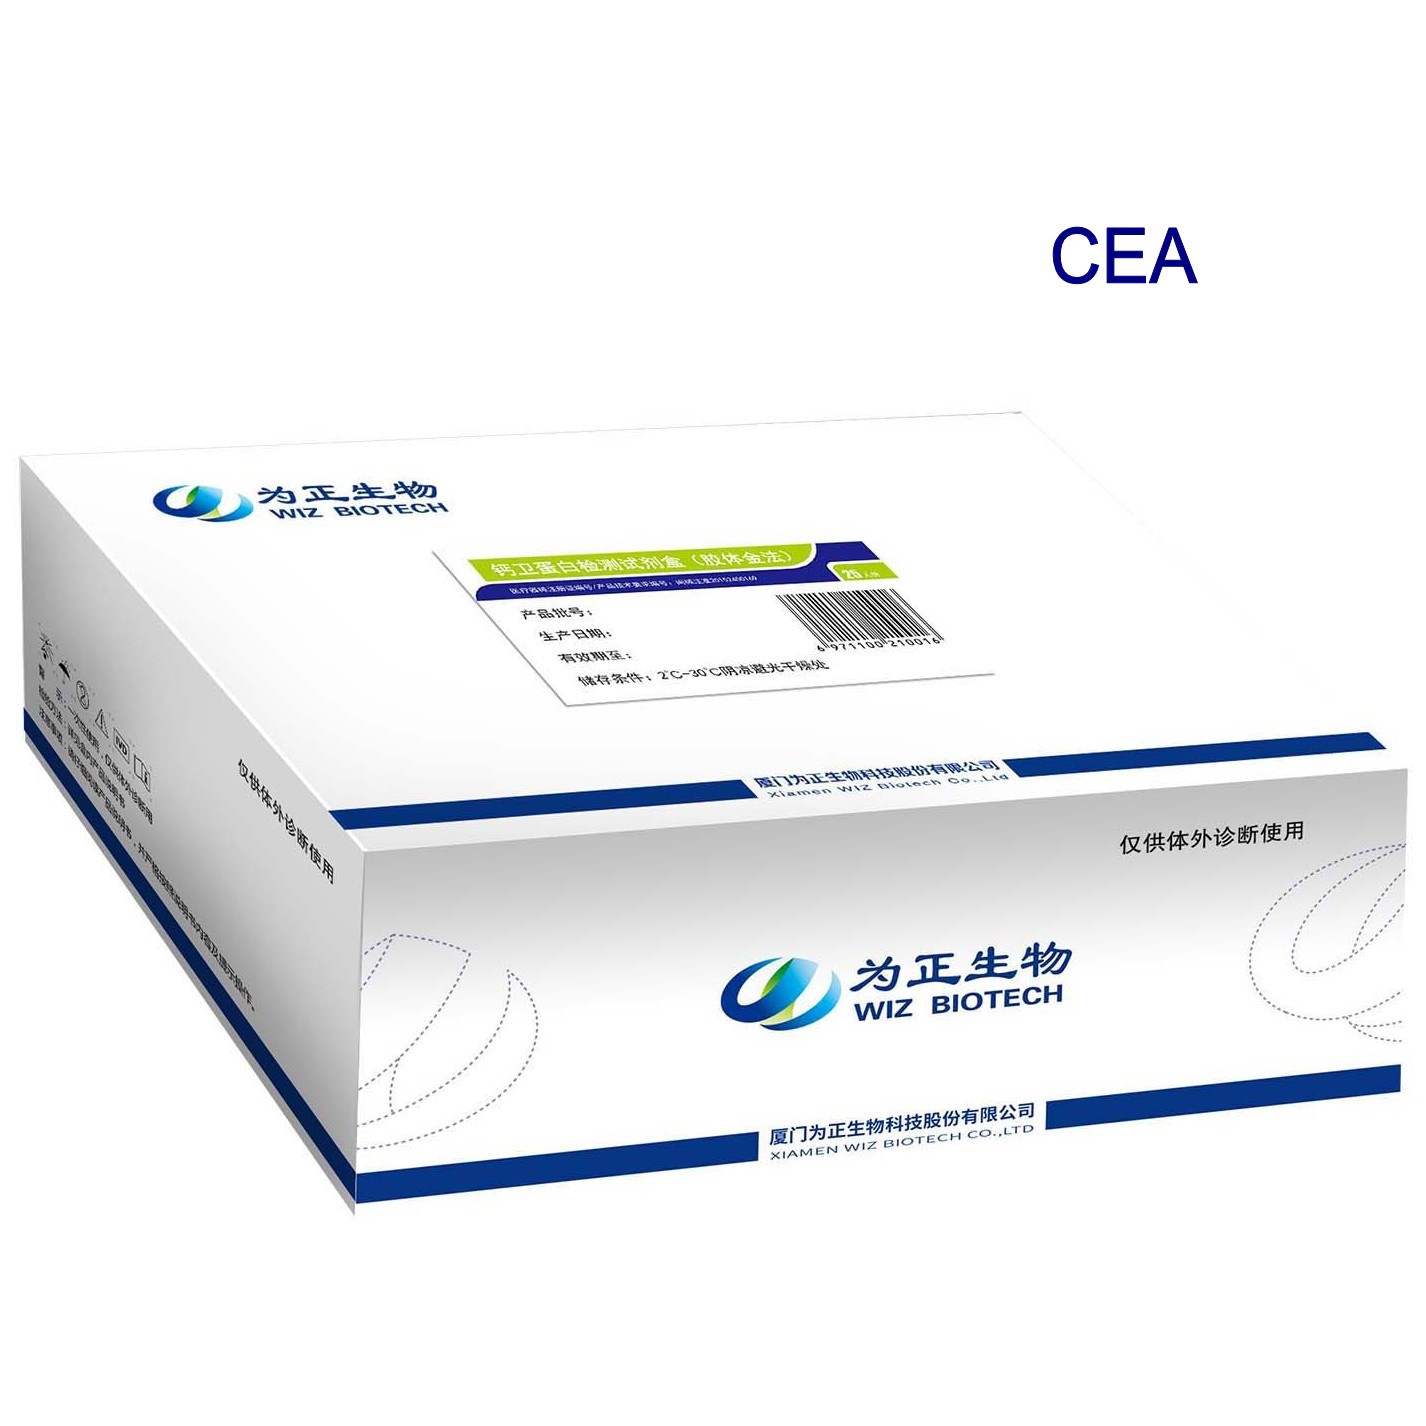 Special Price for Combo Diagnostic Rapid Test - Best Price for Tumor Marker Small Cell Lung Cancer Progrp Elisa Test Kit – Baysen